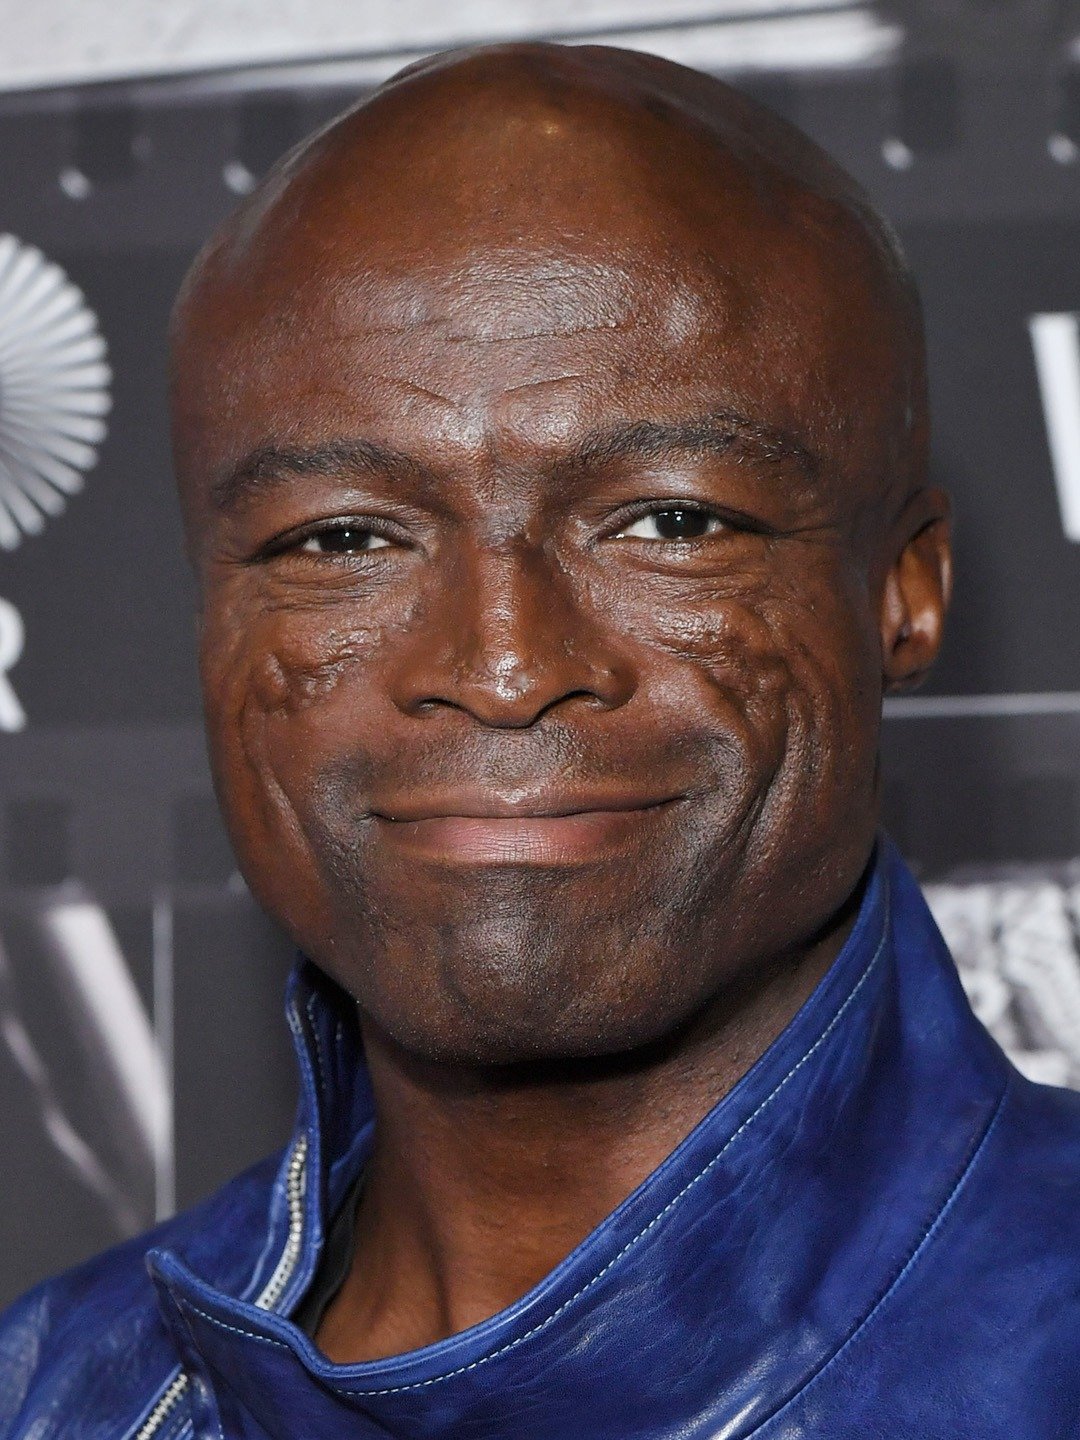 How tall is Seal?